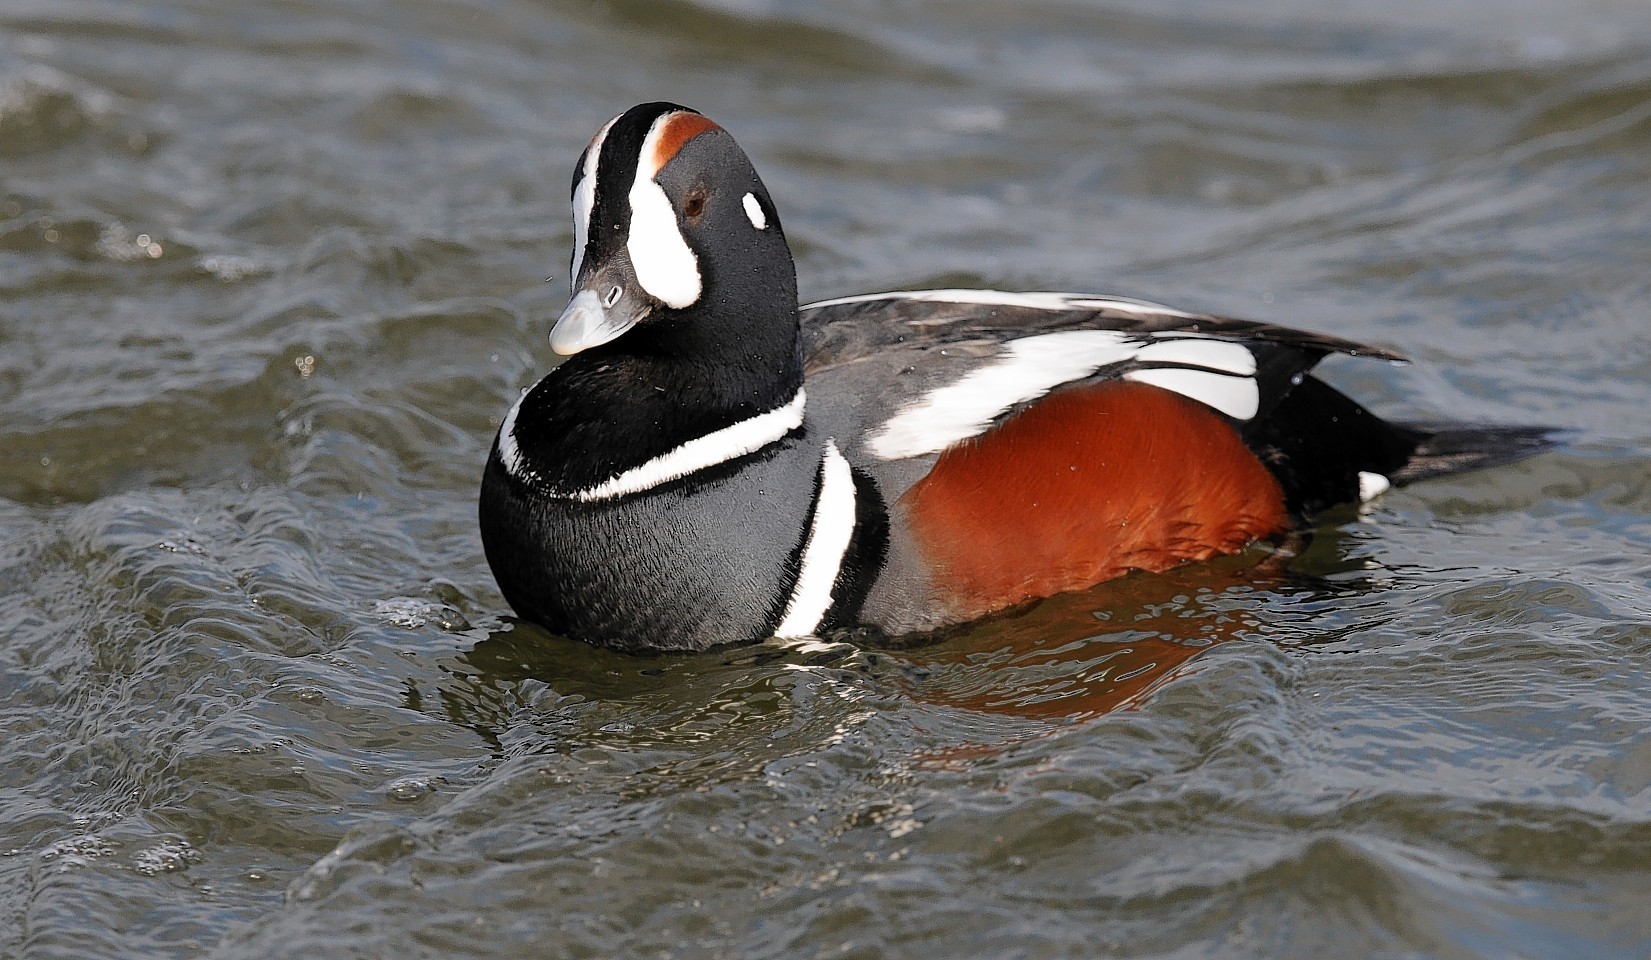 A picture of Harlequin duck from the last time one was seen in the north east several years ago